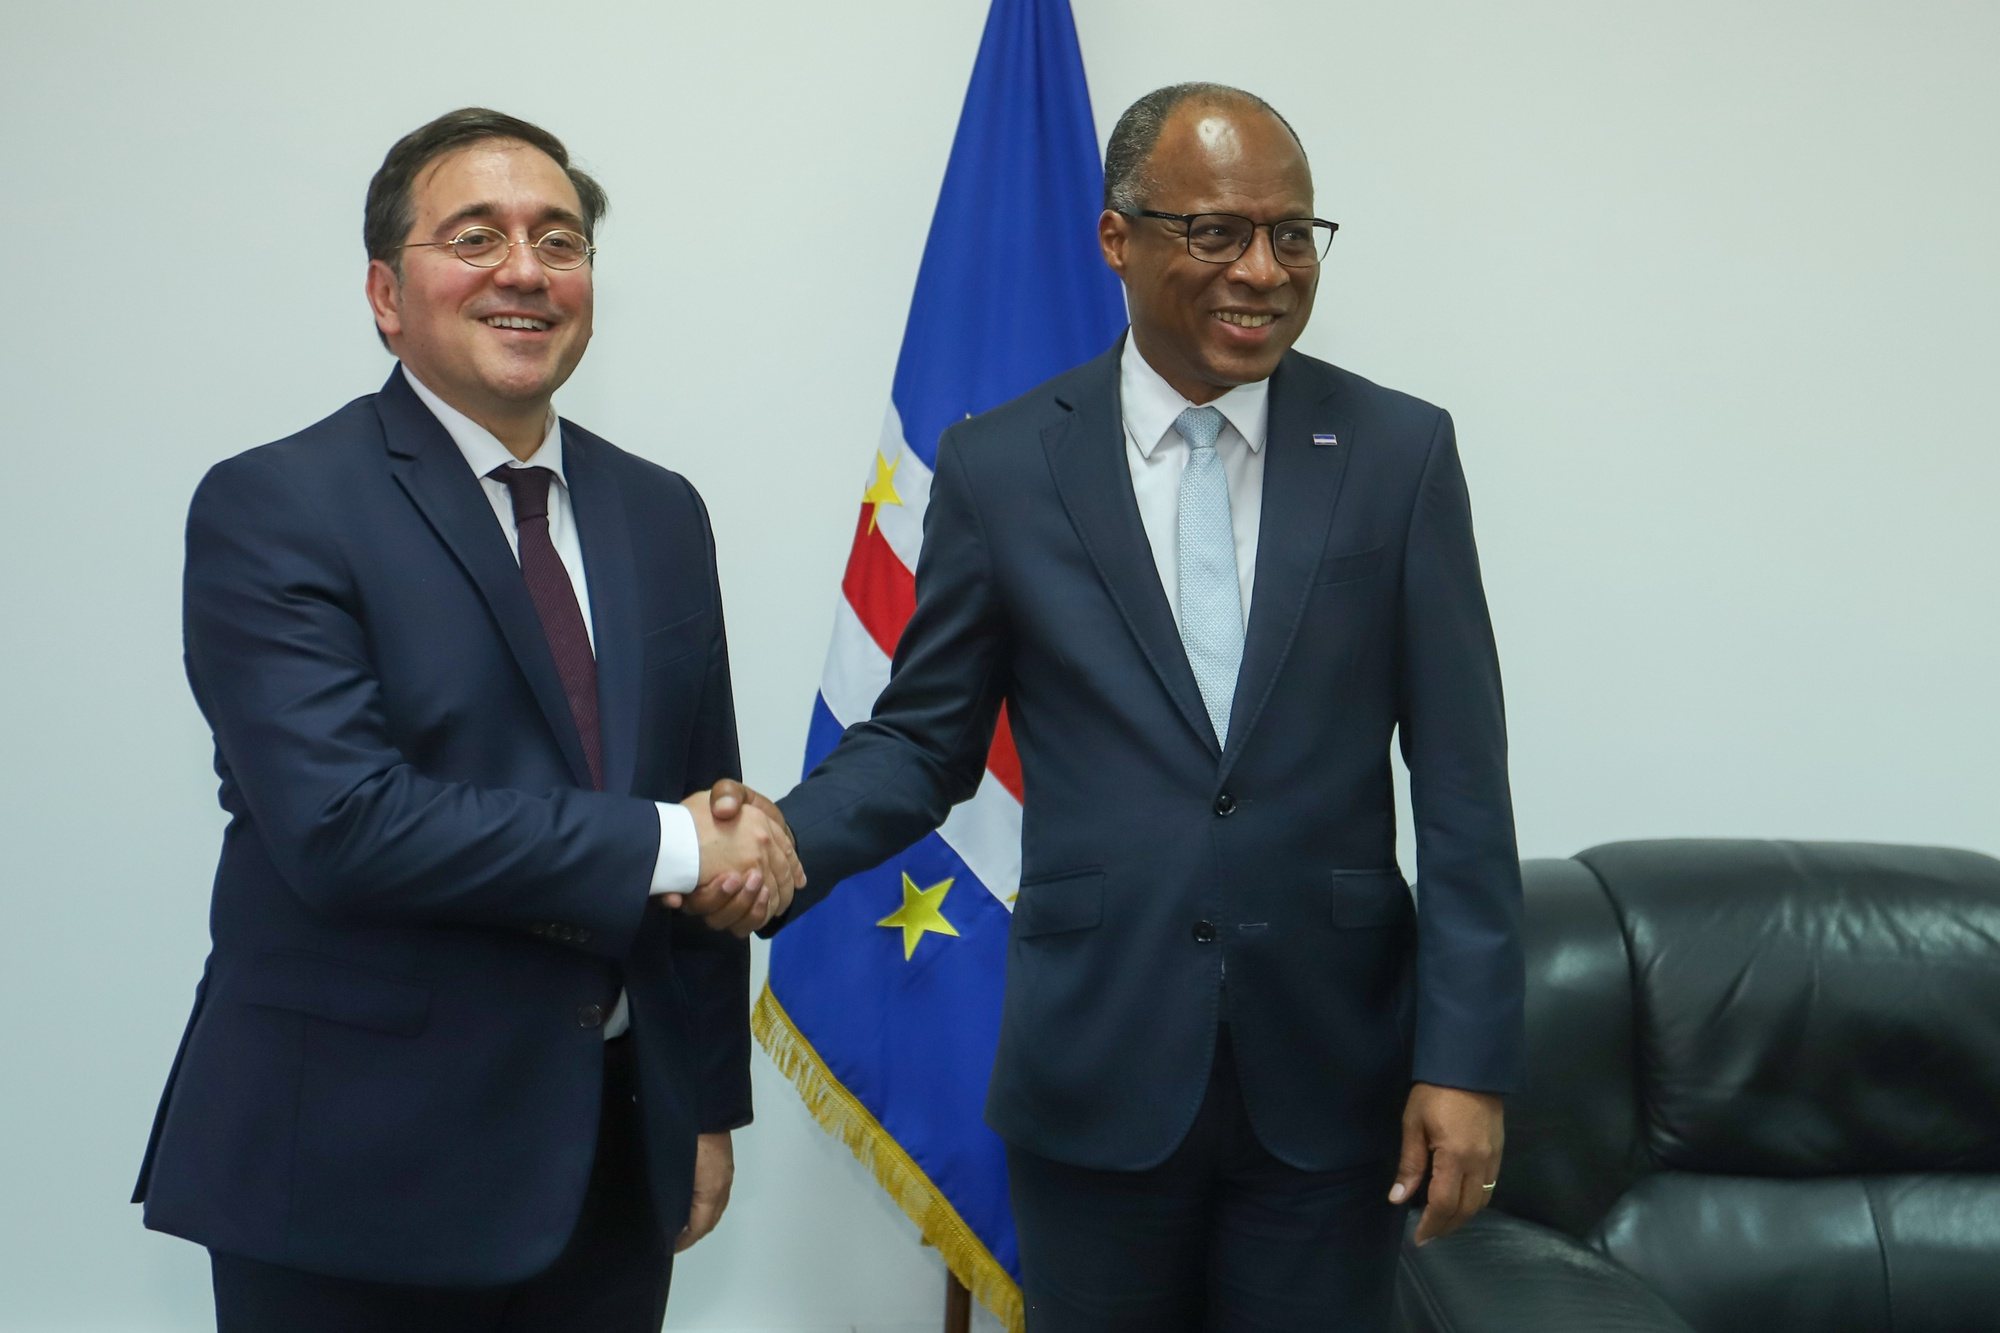 Spanish Foreign Minister, Jose Manuel Albares (L) with the Prime Minister of Cape Verde Jose Ulisses Correia e Silva, before a meeting in Praia, Cape Verde, 18 June 2024. Jose Manuel Albares is traveling to Cape Verde with the aim of reinforcing the Spanish government&#039;s commitment to the country&#039;s economic future and to the reforms aimed at promoting the implementation of the blue economy and increasing security, ELTON MONTEIRO/LUSA